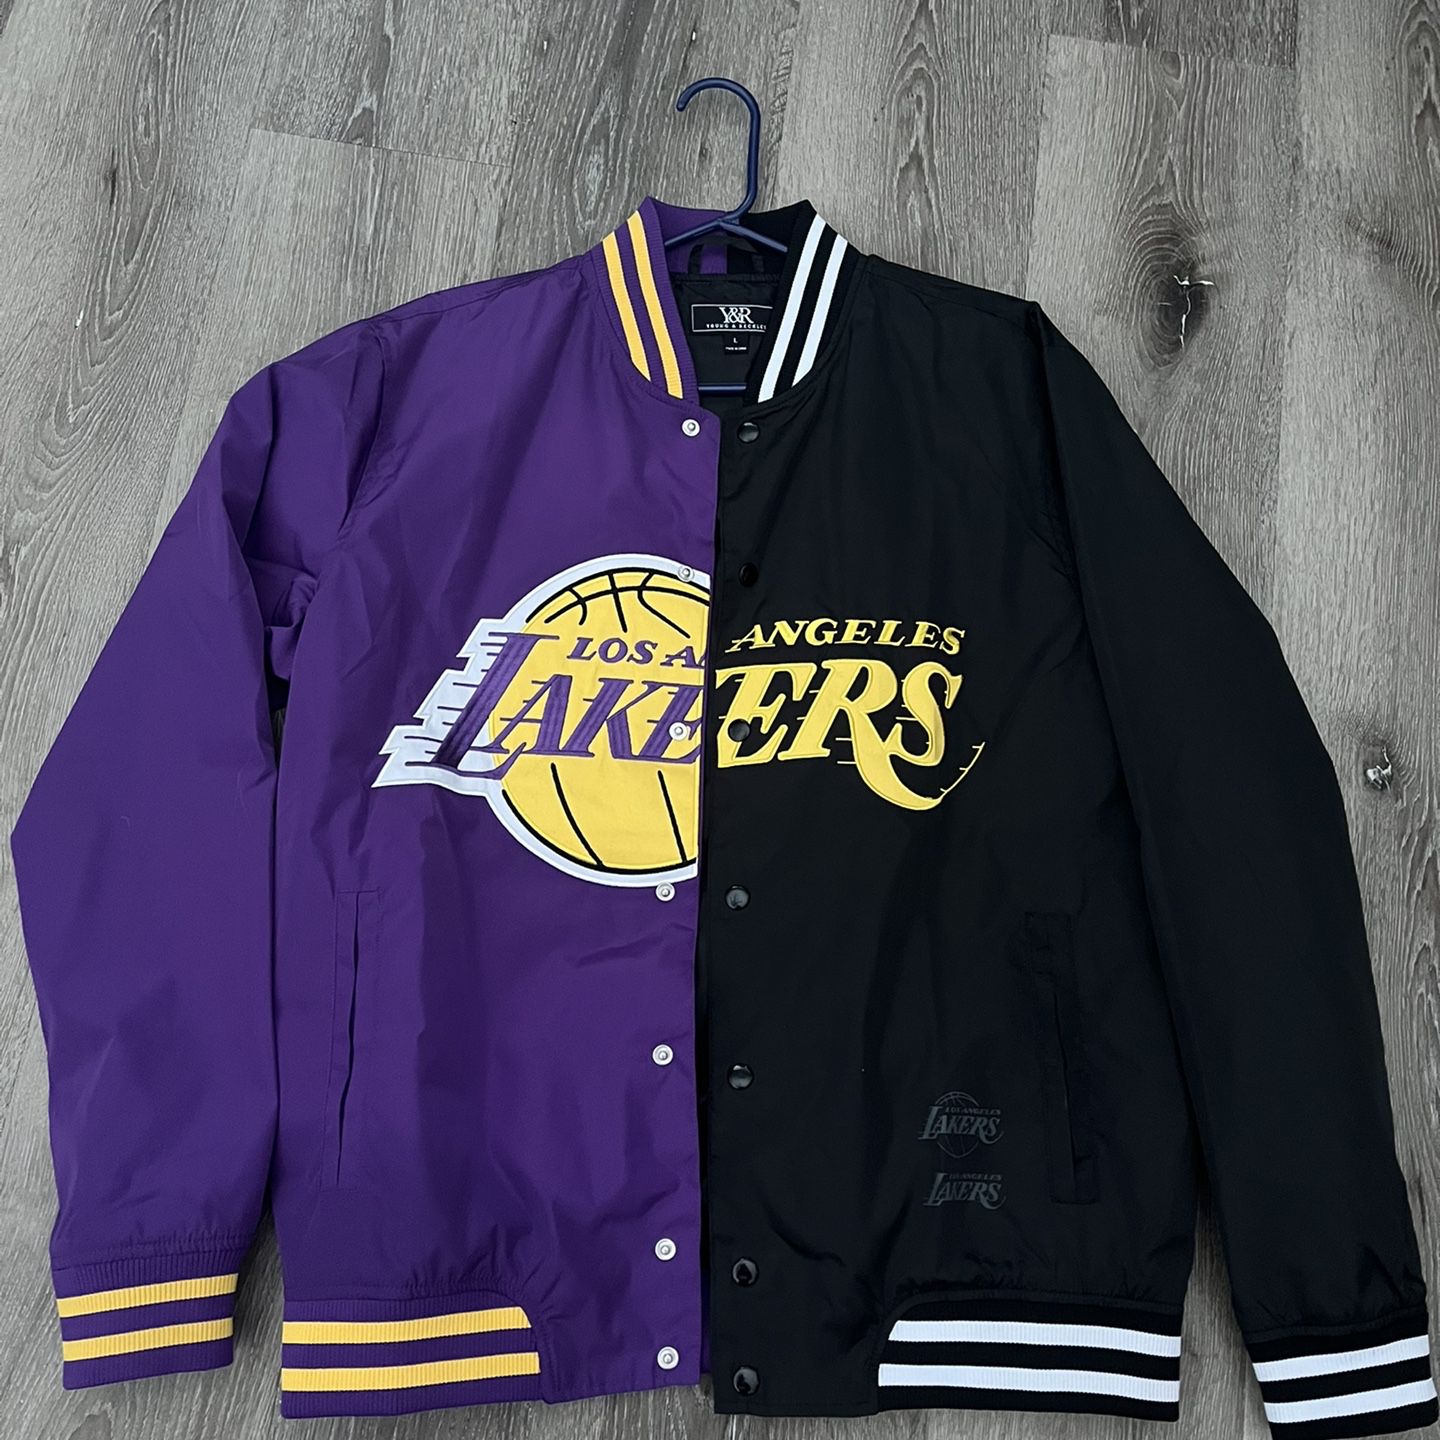 Double Sided Adidas Lakers Kids Varsity Jacket for Sale in Riverside  County, CA - OfferUp